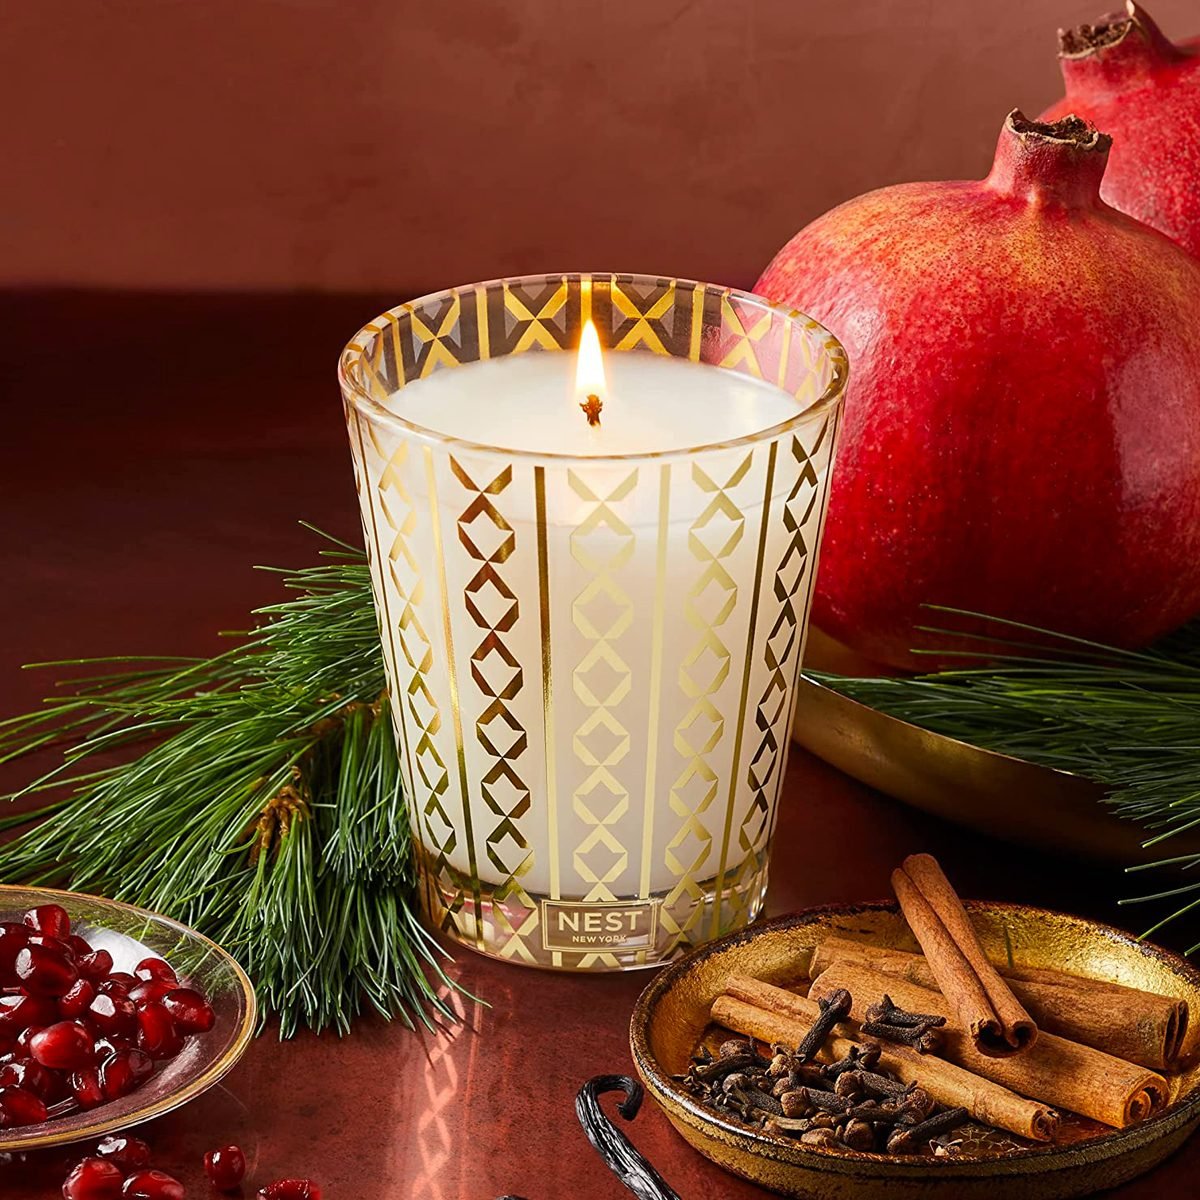 https://www.tasteofhome.com/wp-content/uploads/2022/09/NEST-Fragrances-Holiday-Scented-Classic-Candle-ecomm-amazon.com_.jpg?fit=700%2C700